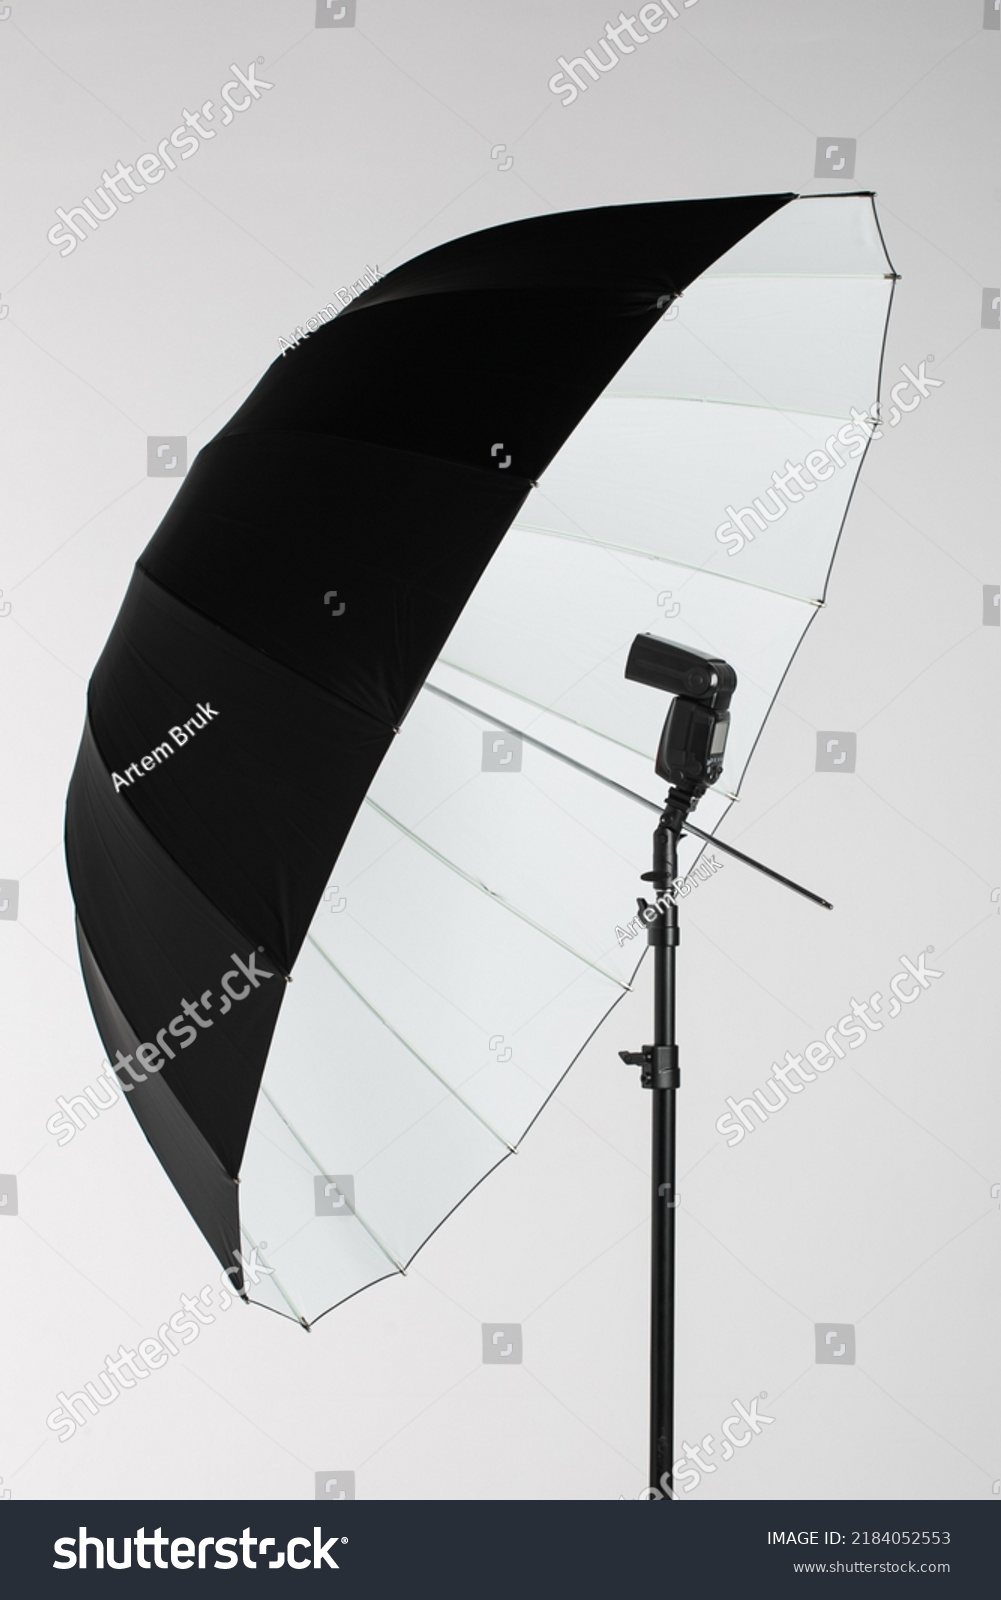 Camera flash head mounted on stand with umbrella light reflector in photography studio #2184052553